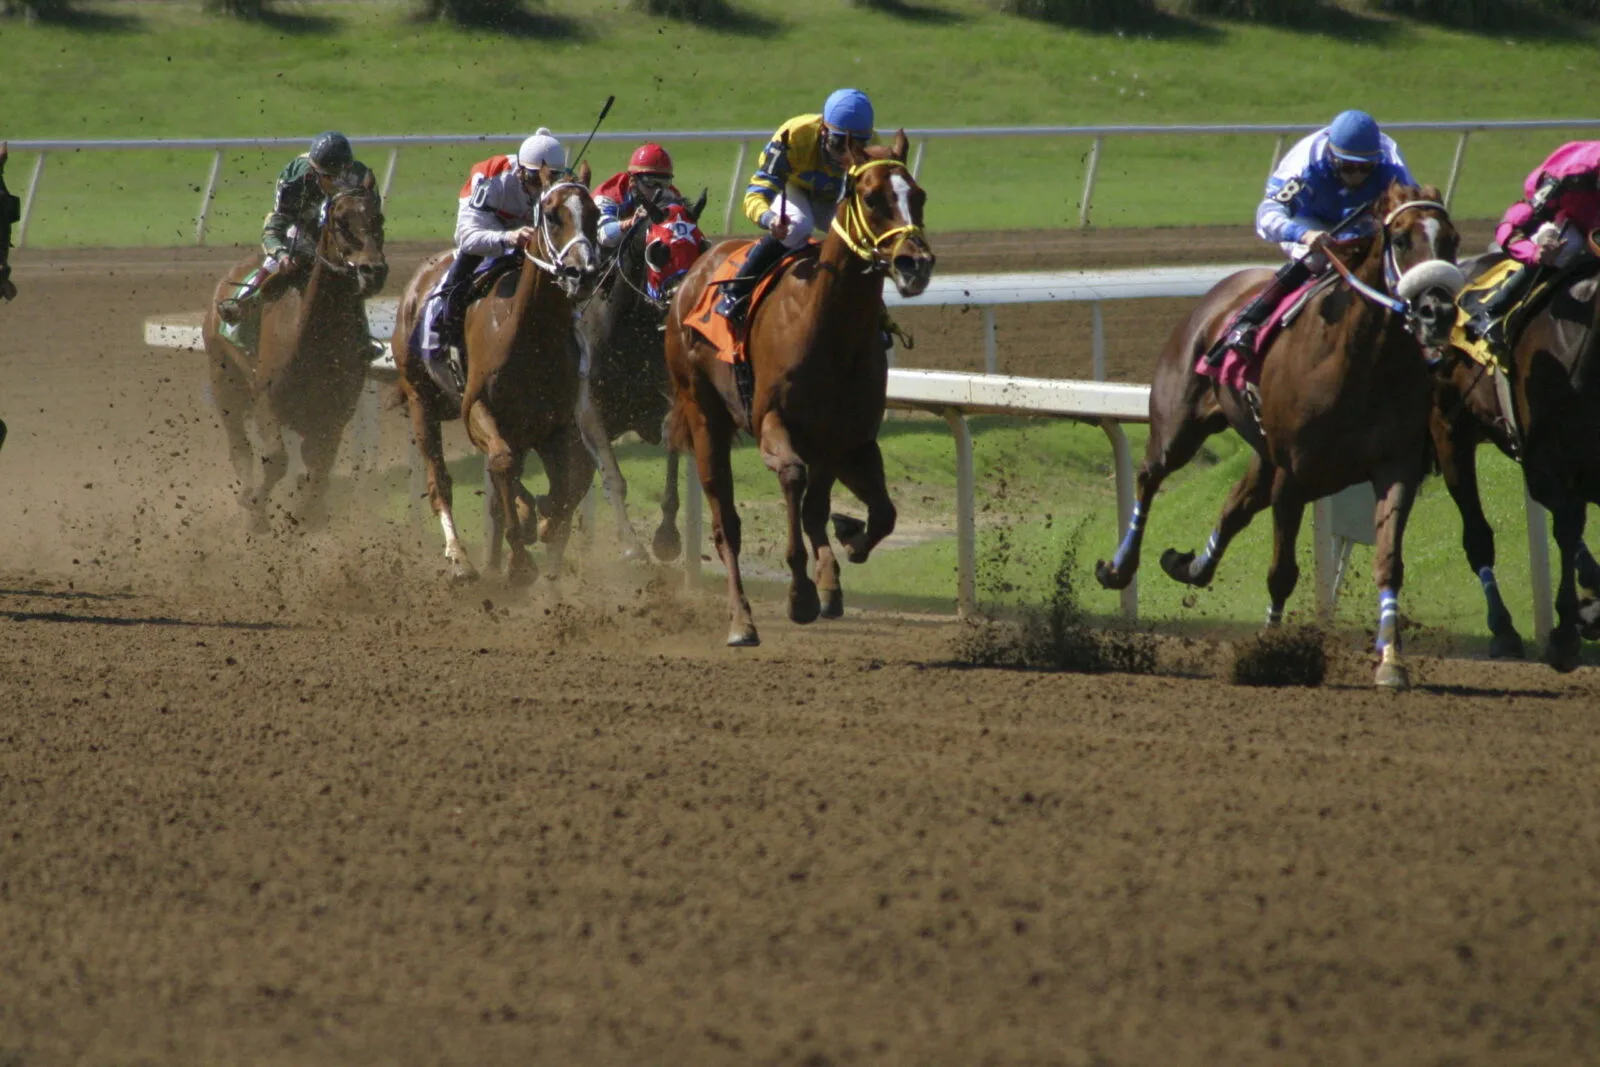 A thoroughbred race at the Saratoga Race Course